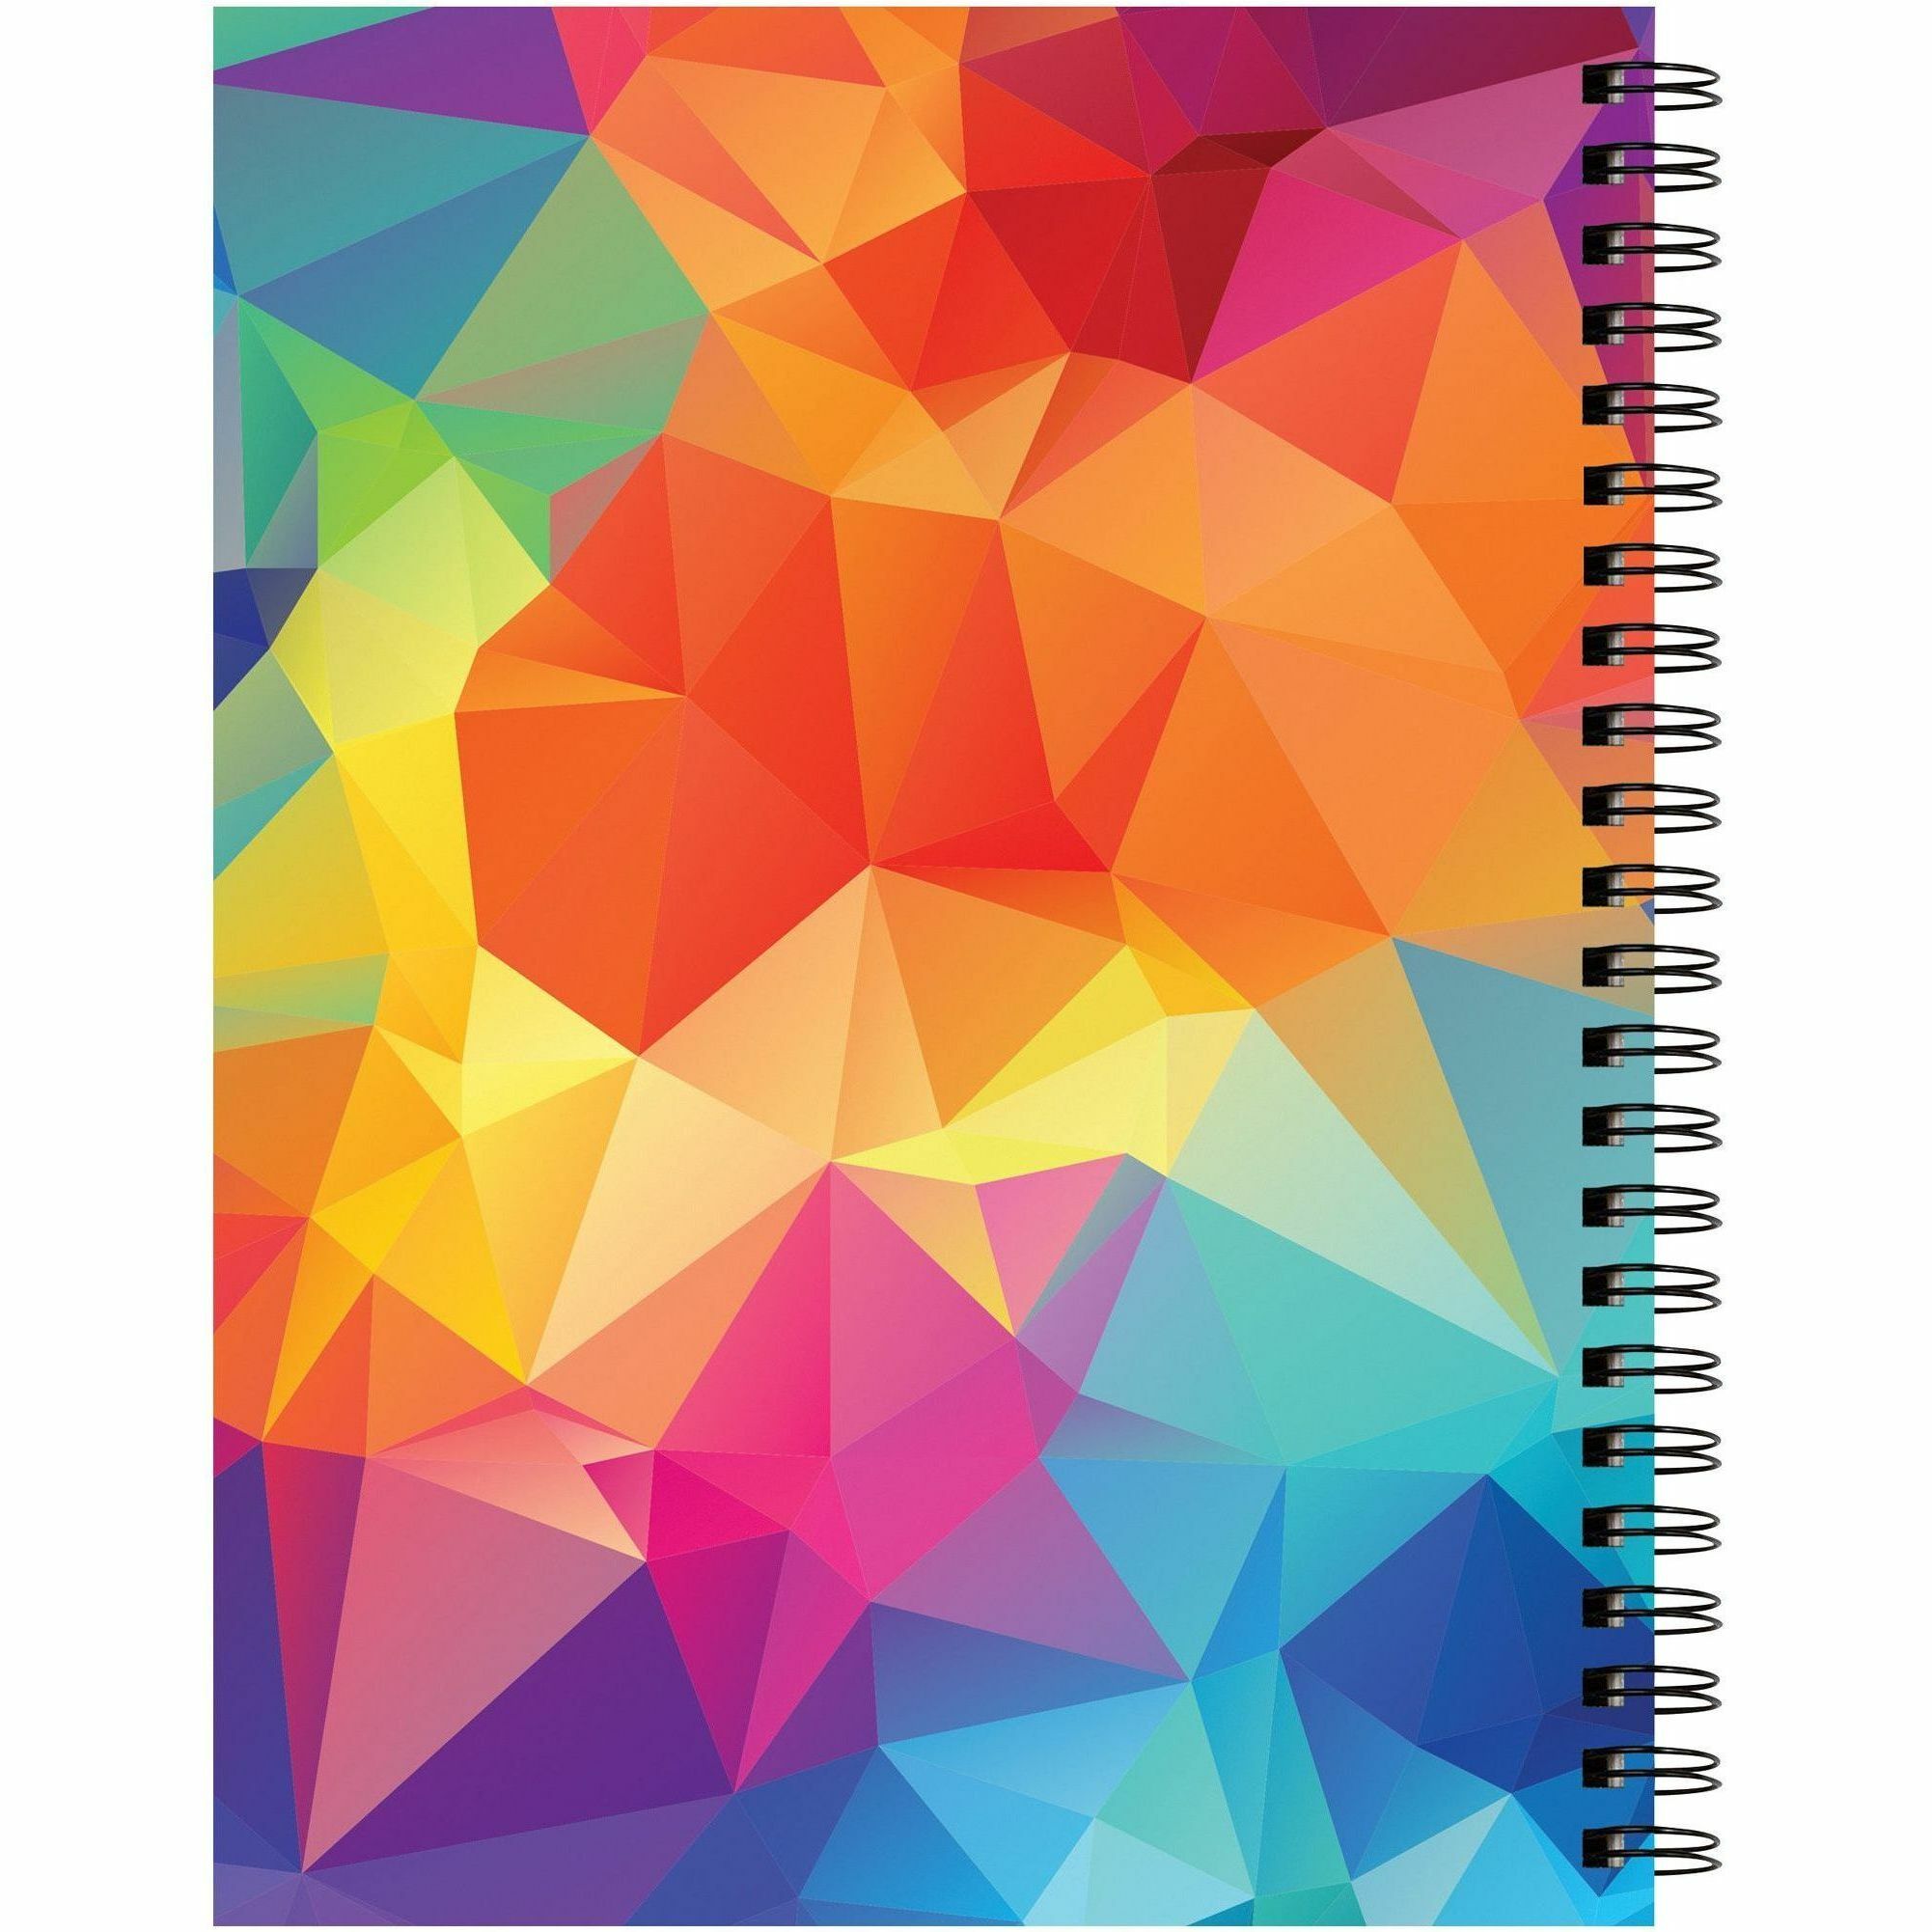 pacon-fashion-sketch-book-75-pages-spiral-120-g-m2-grammage-9-x-6-neon-kaleidoscope-cover-acid-free-perforated-durable_pacp38034 - 3